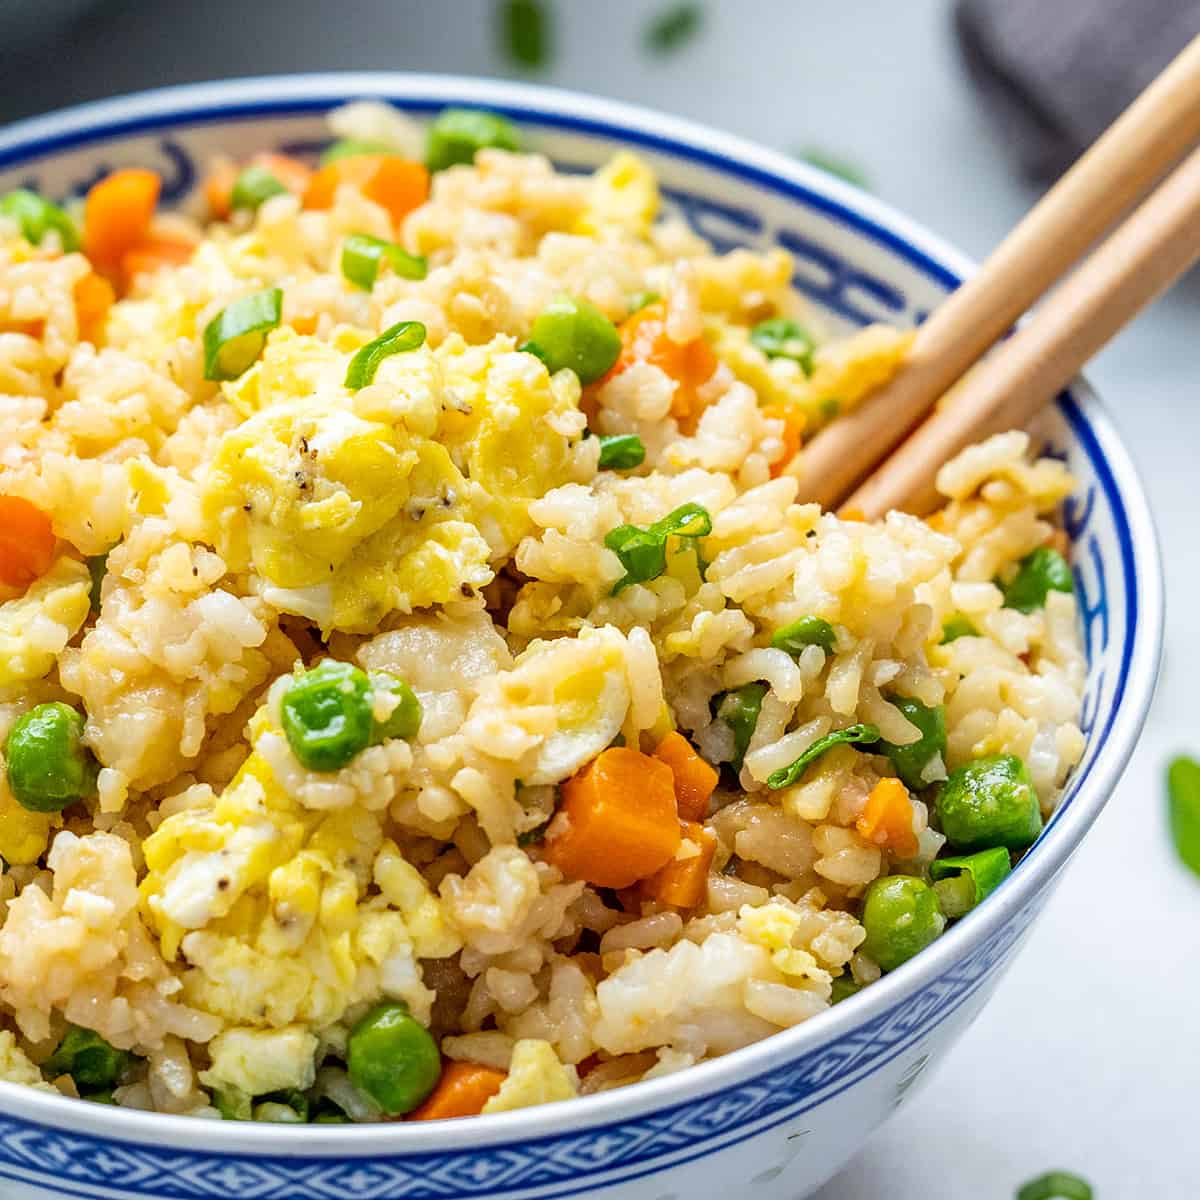 Takeout fried rice.